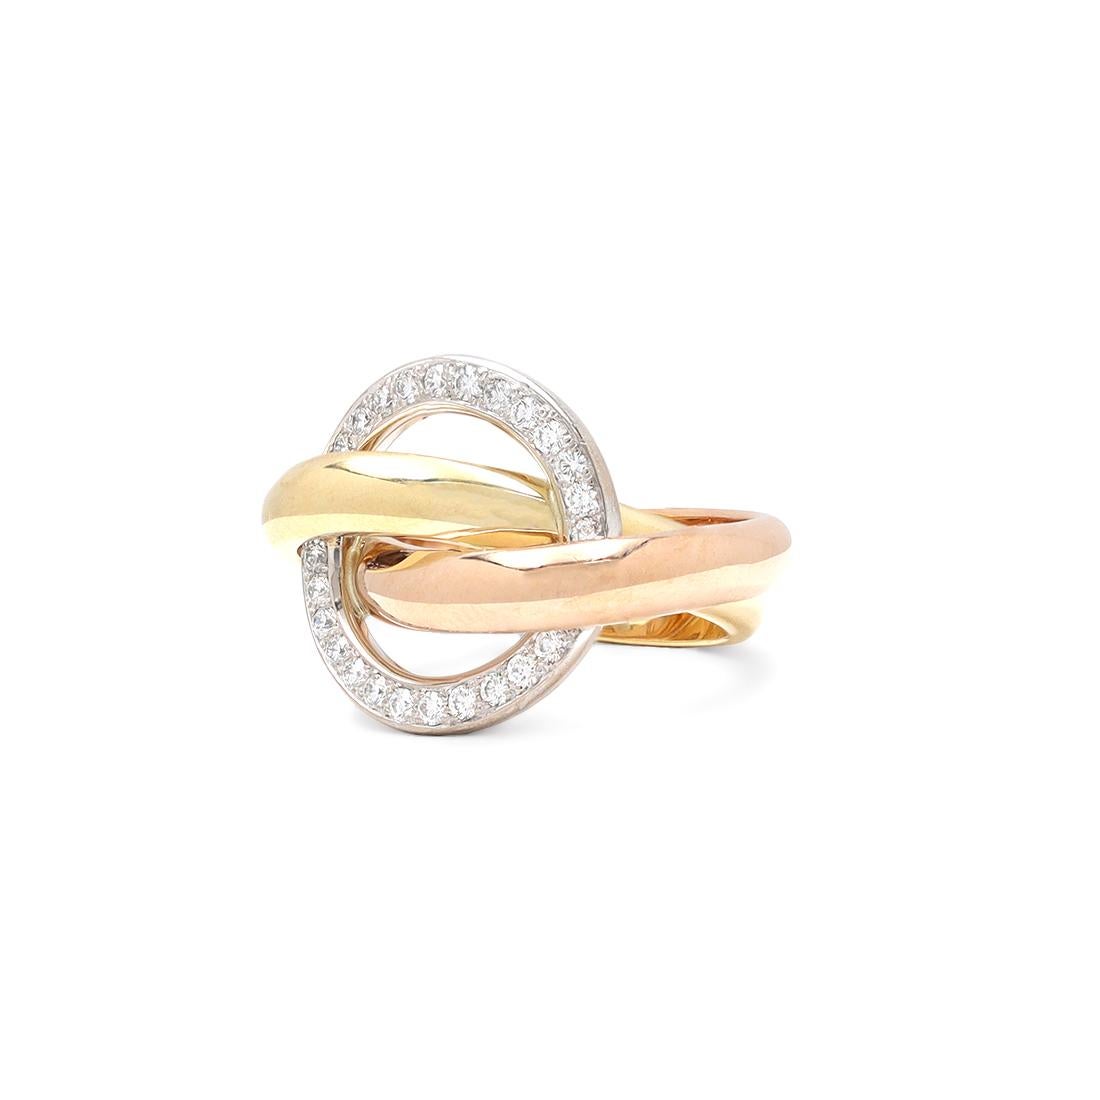 Authentic Cartier Trinity 'Crash' ring comprised of interlocking tri-color 18 karat gold bands. The fixed white gold band is set with round brilliant cut diamonds estimated 0.48 carats total weight. Signed Cartier, 53, 750, with serial number and